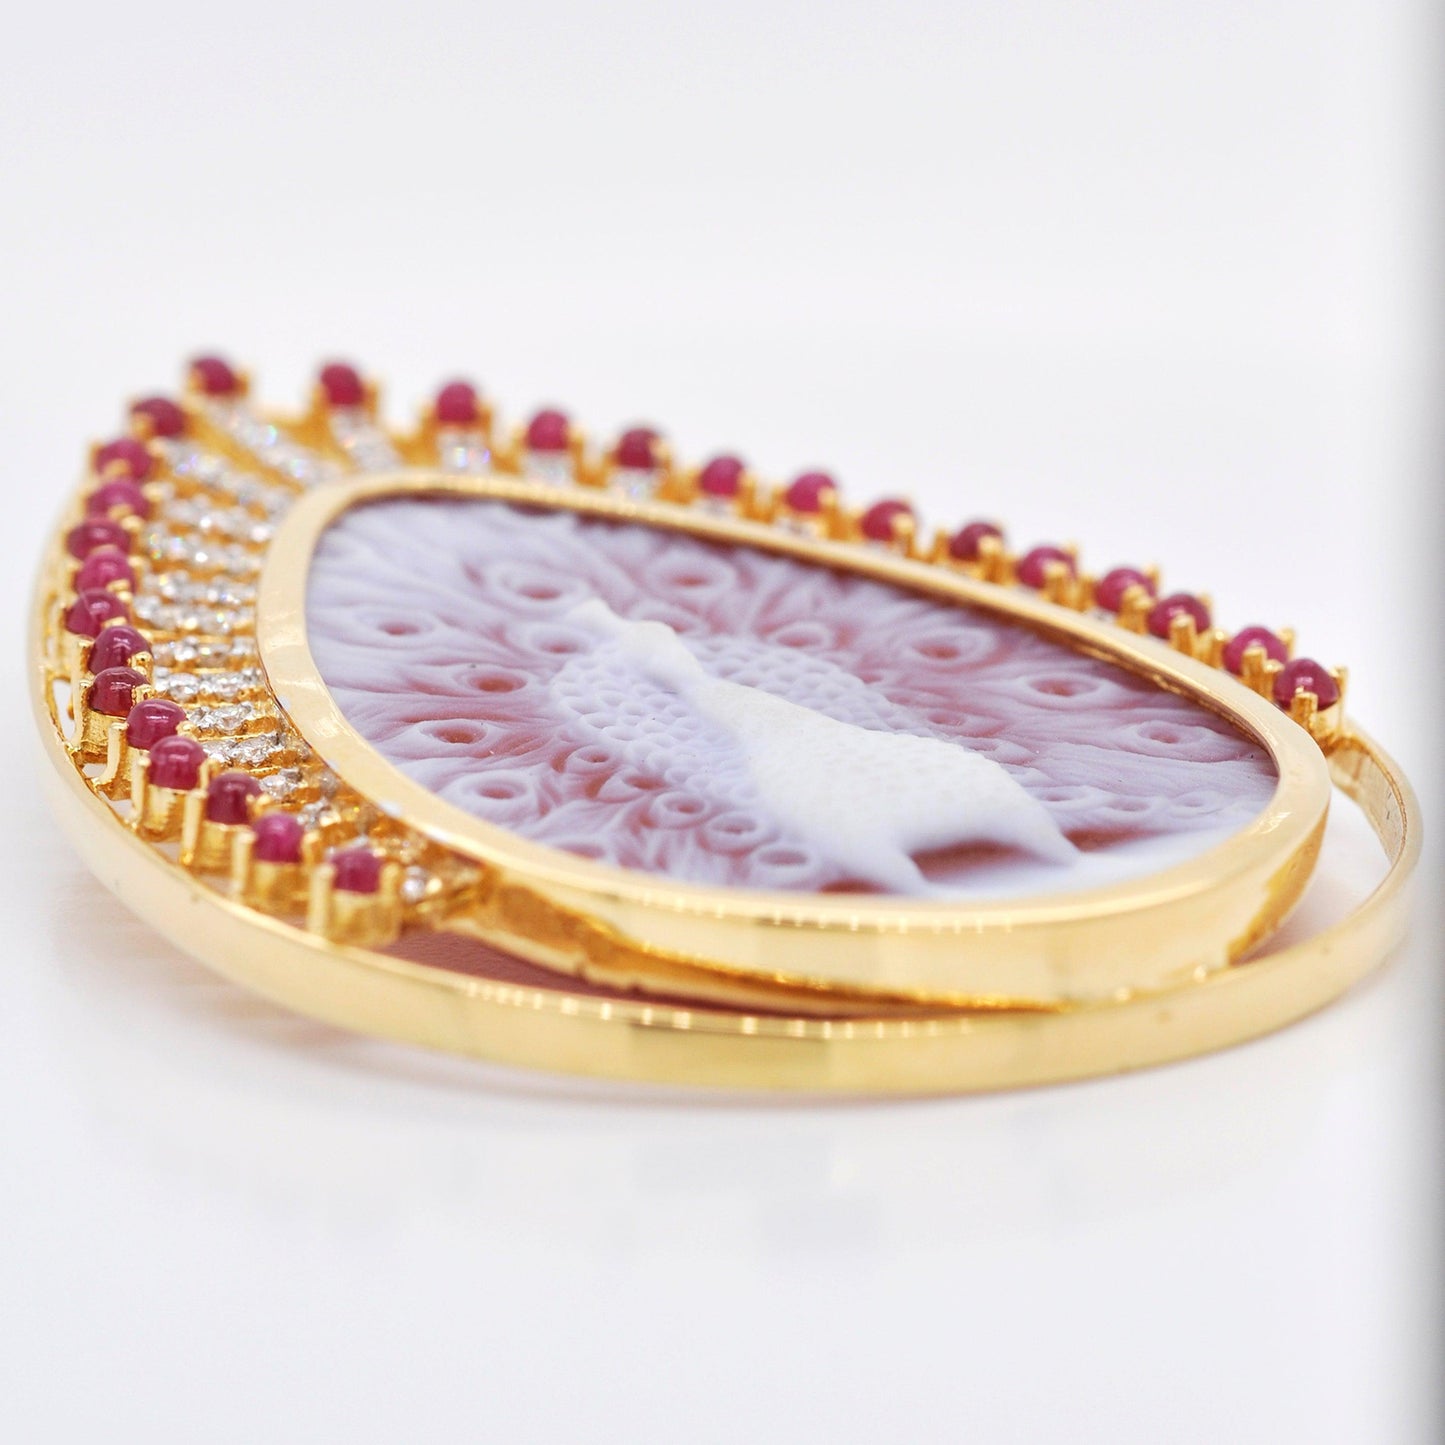 Agate Cameo Pendant with Ruby and Diamond Accents